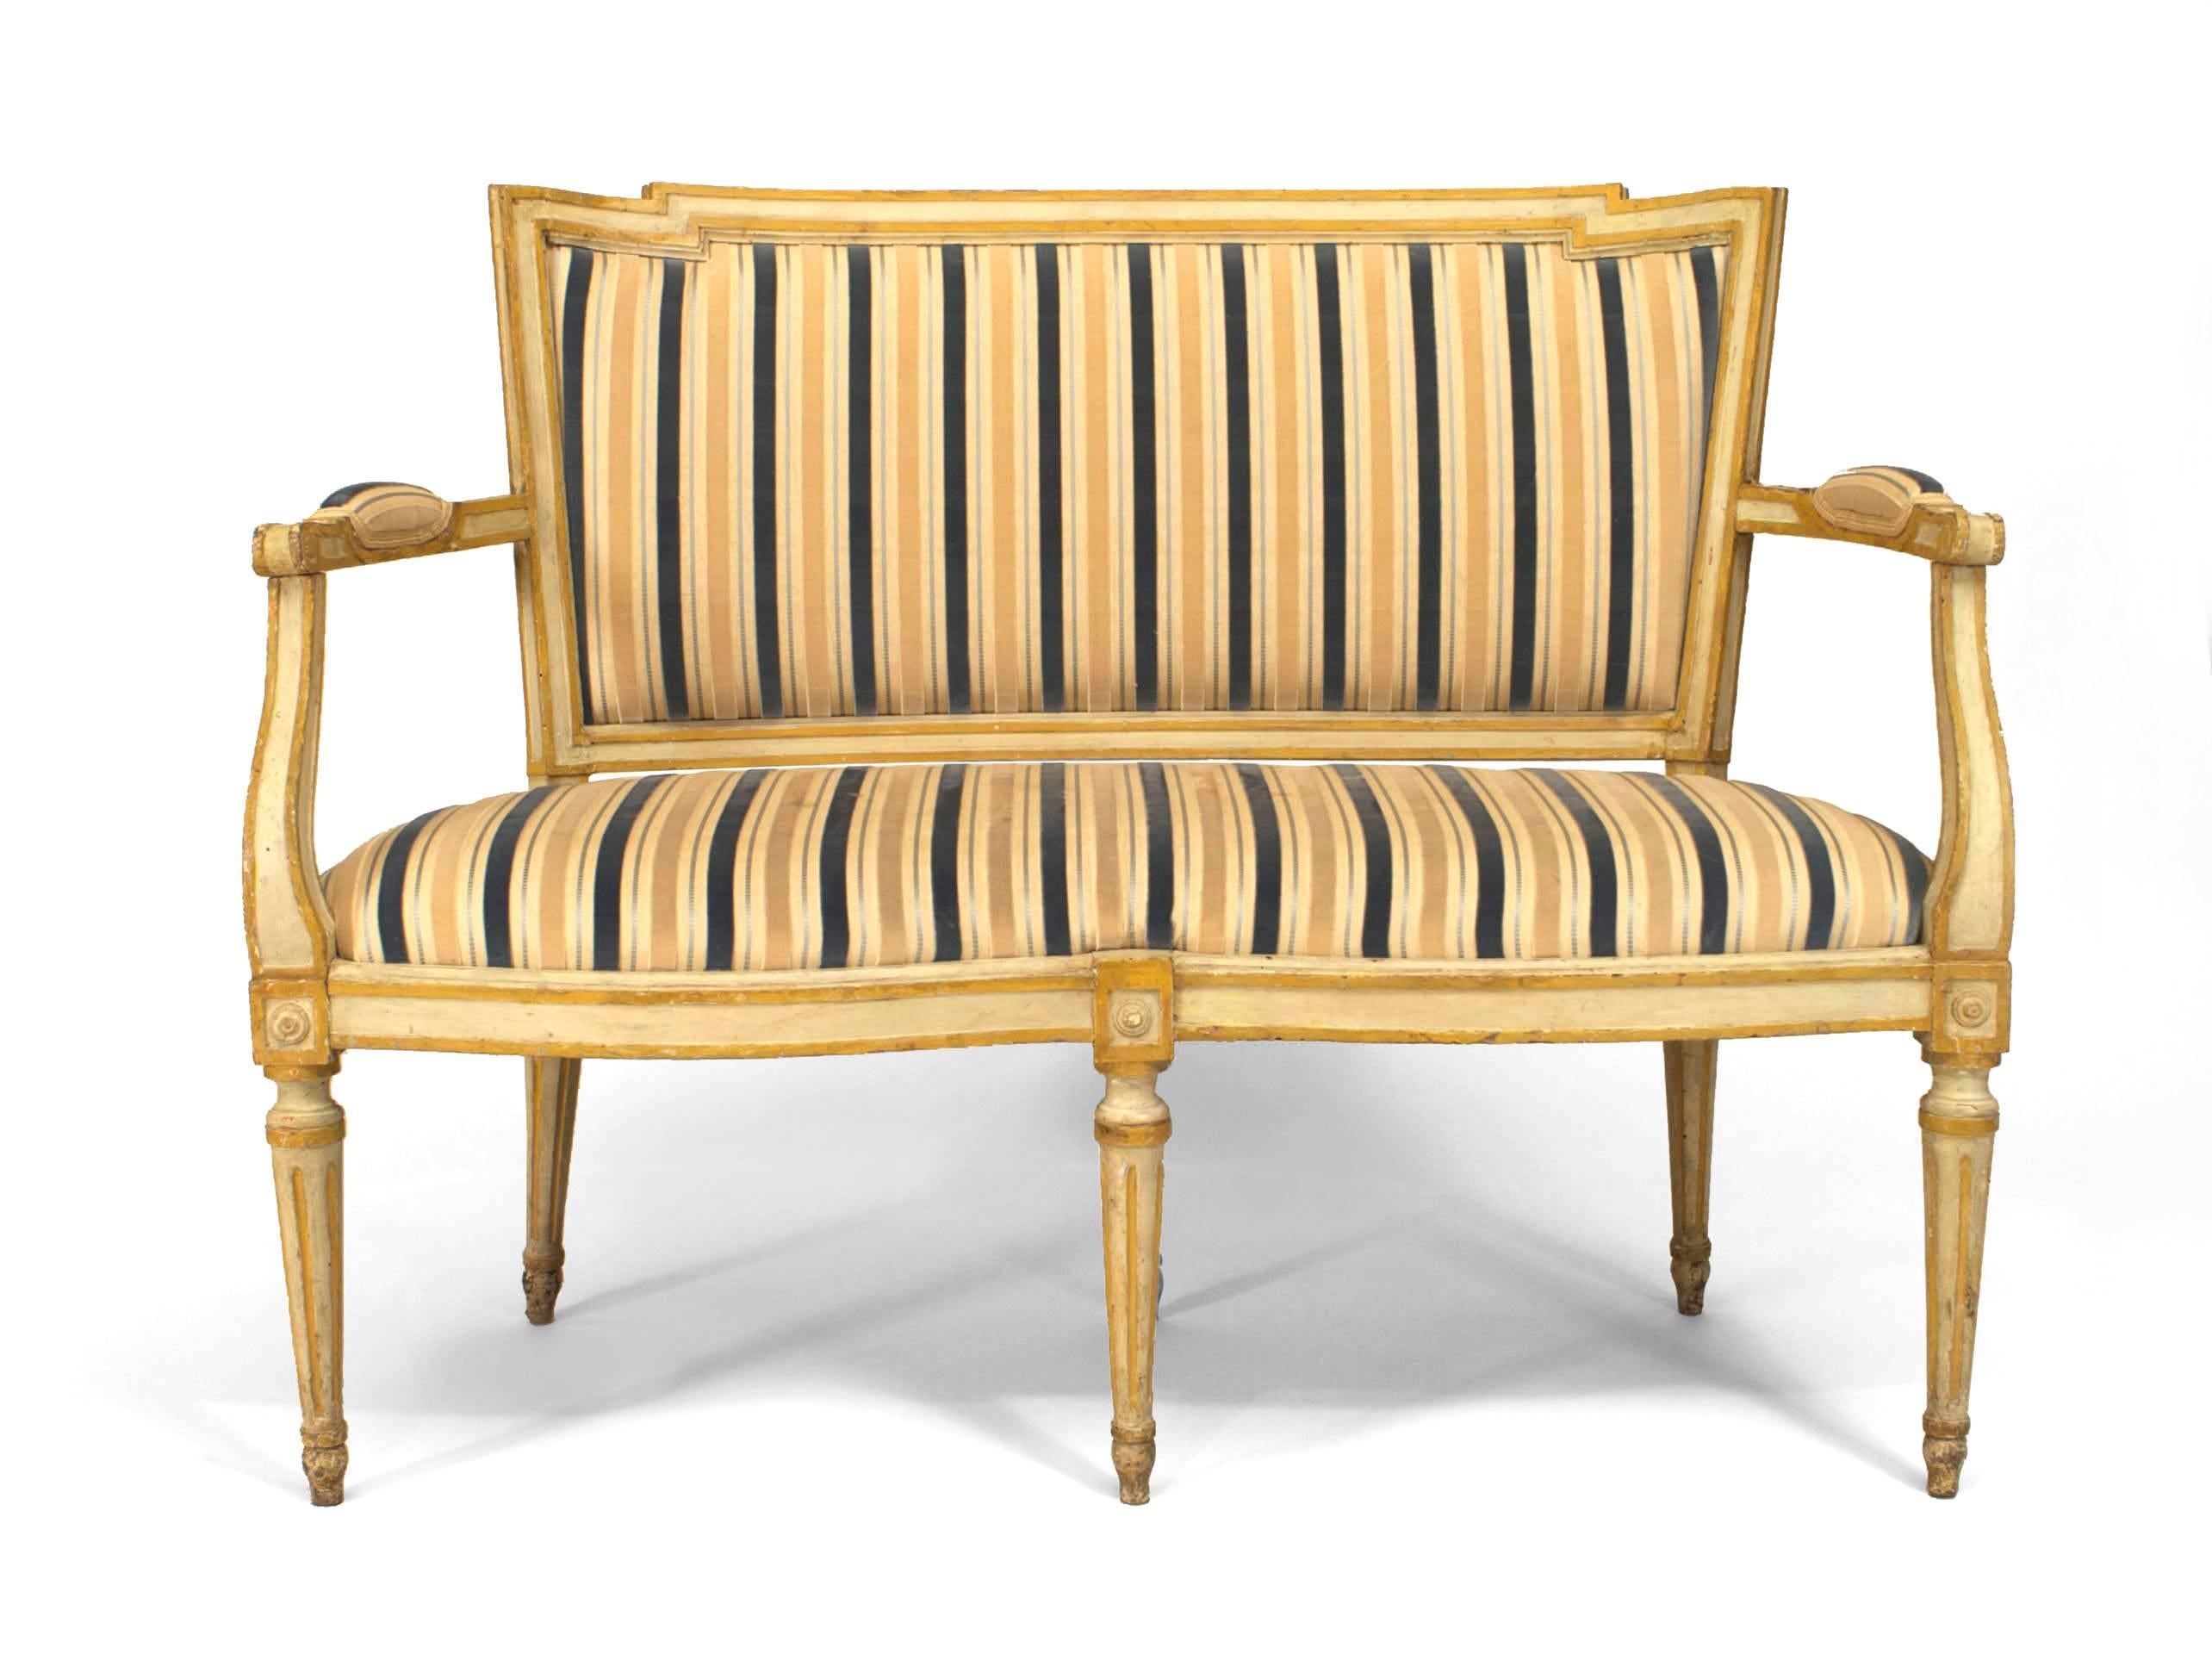 Italian Neo-classic (18/19th Cent) white painted and gold trimmed loveseat with a shaped front and center leg with striped upholstered seat and back
